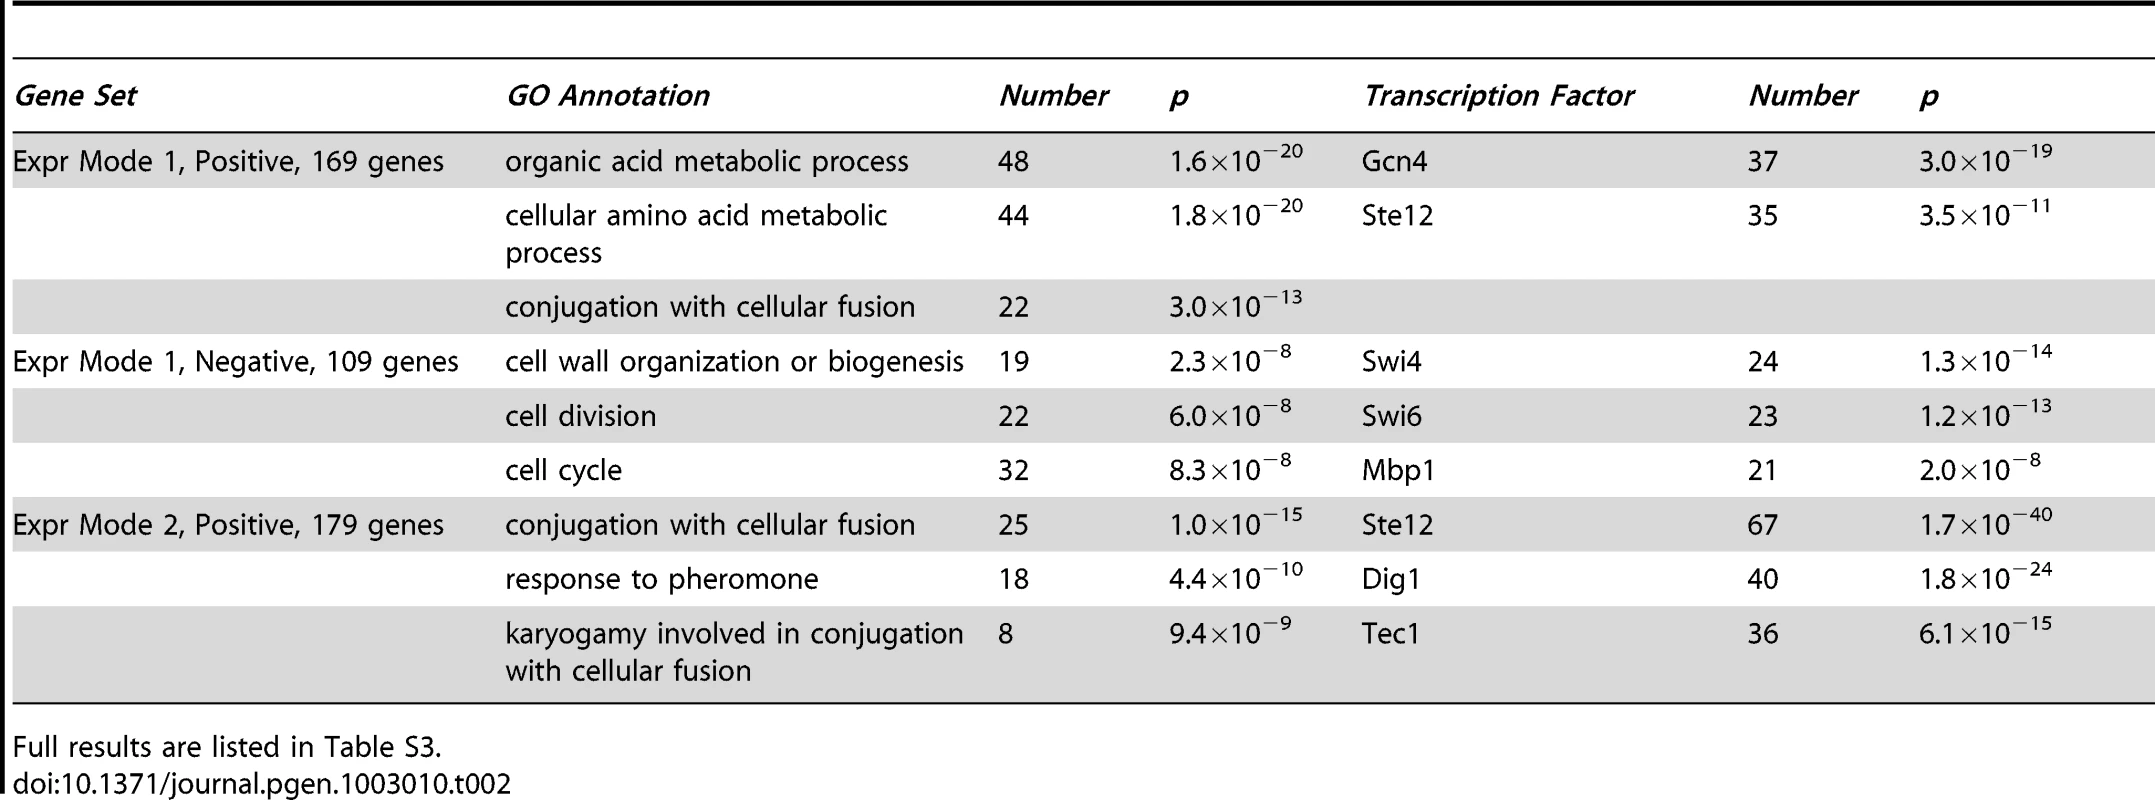 Summary of enriched functions and transcription factor binding targets for expression gene sets.